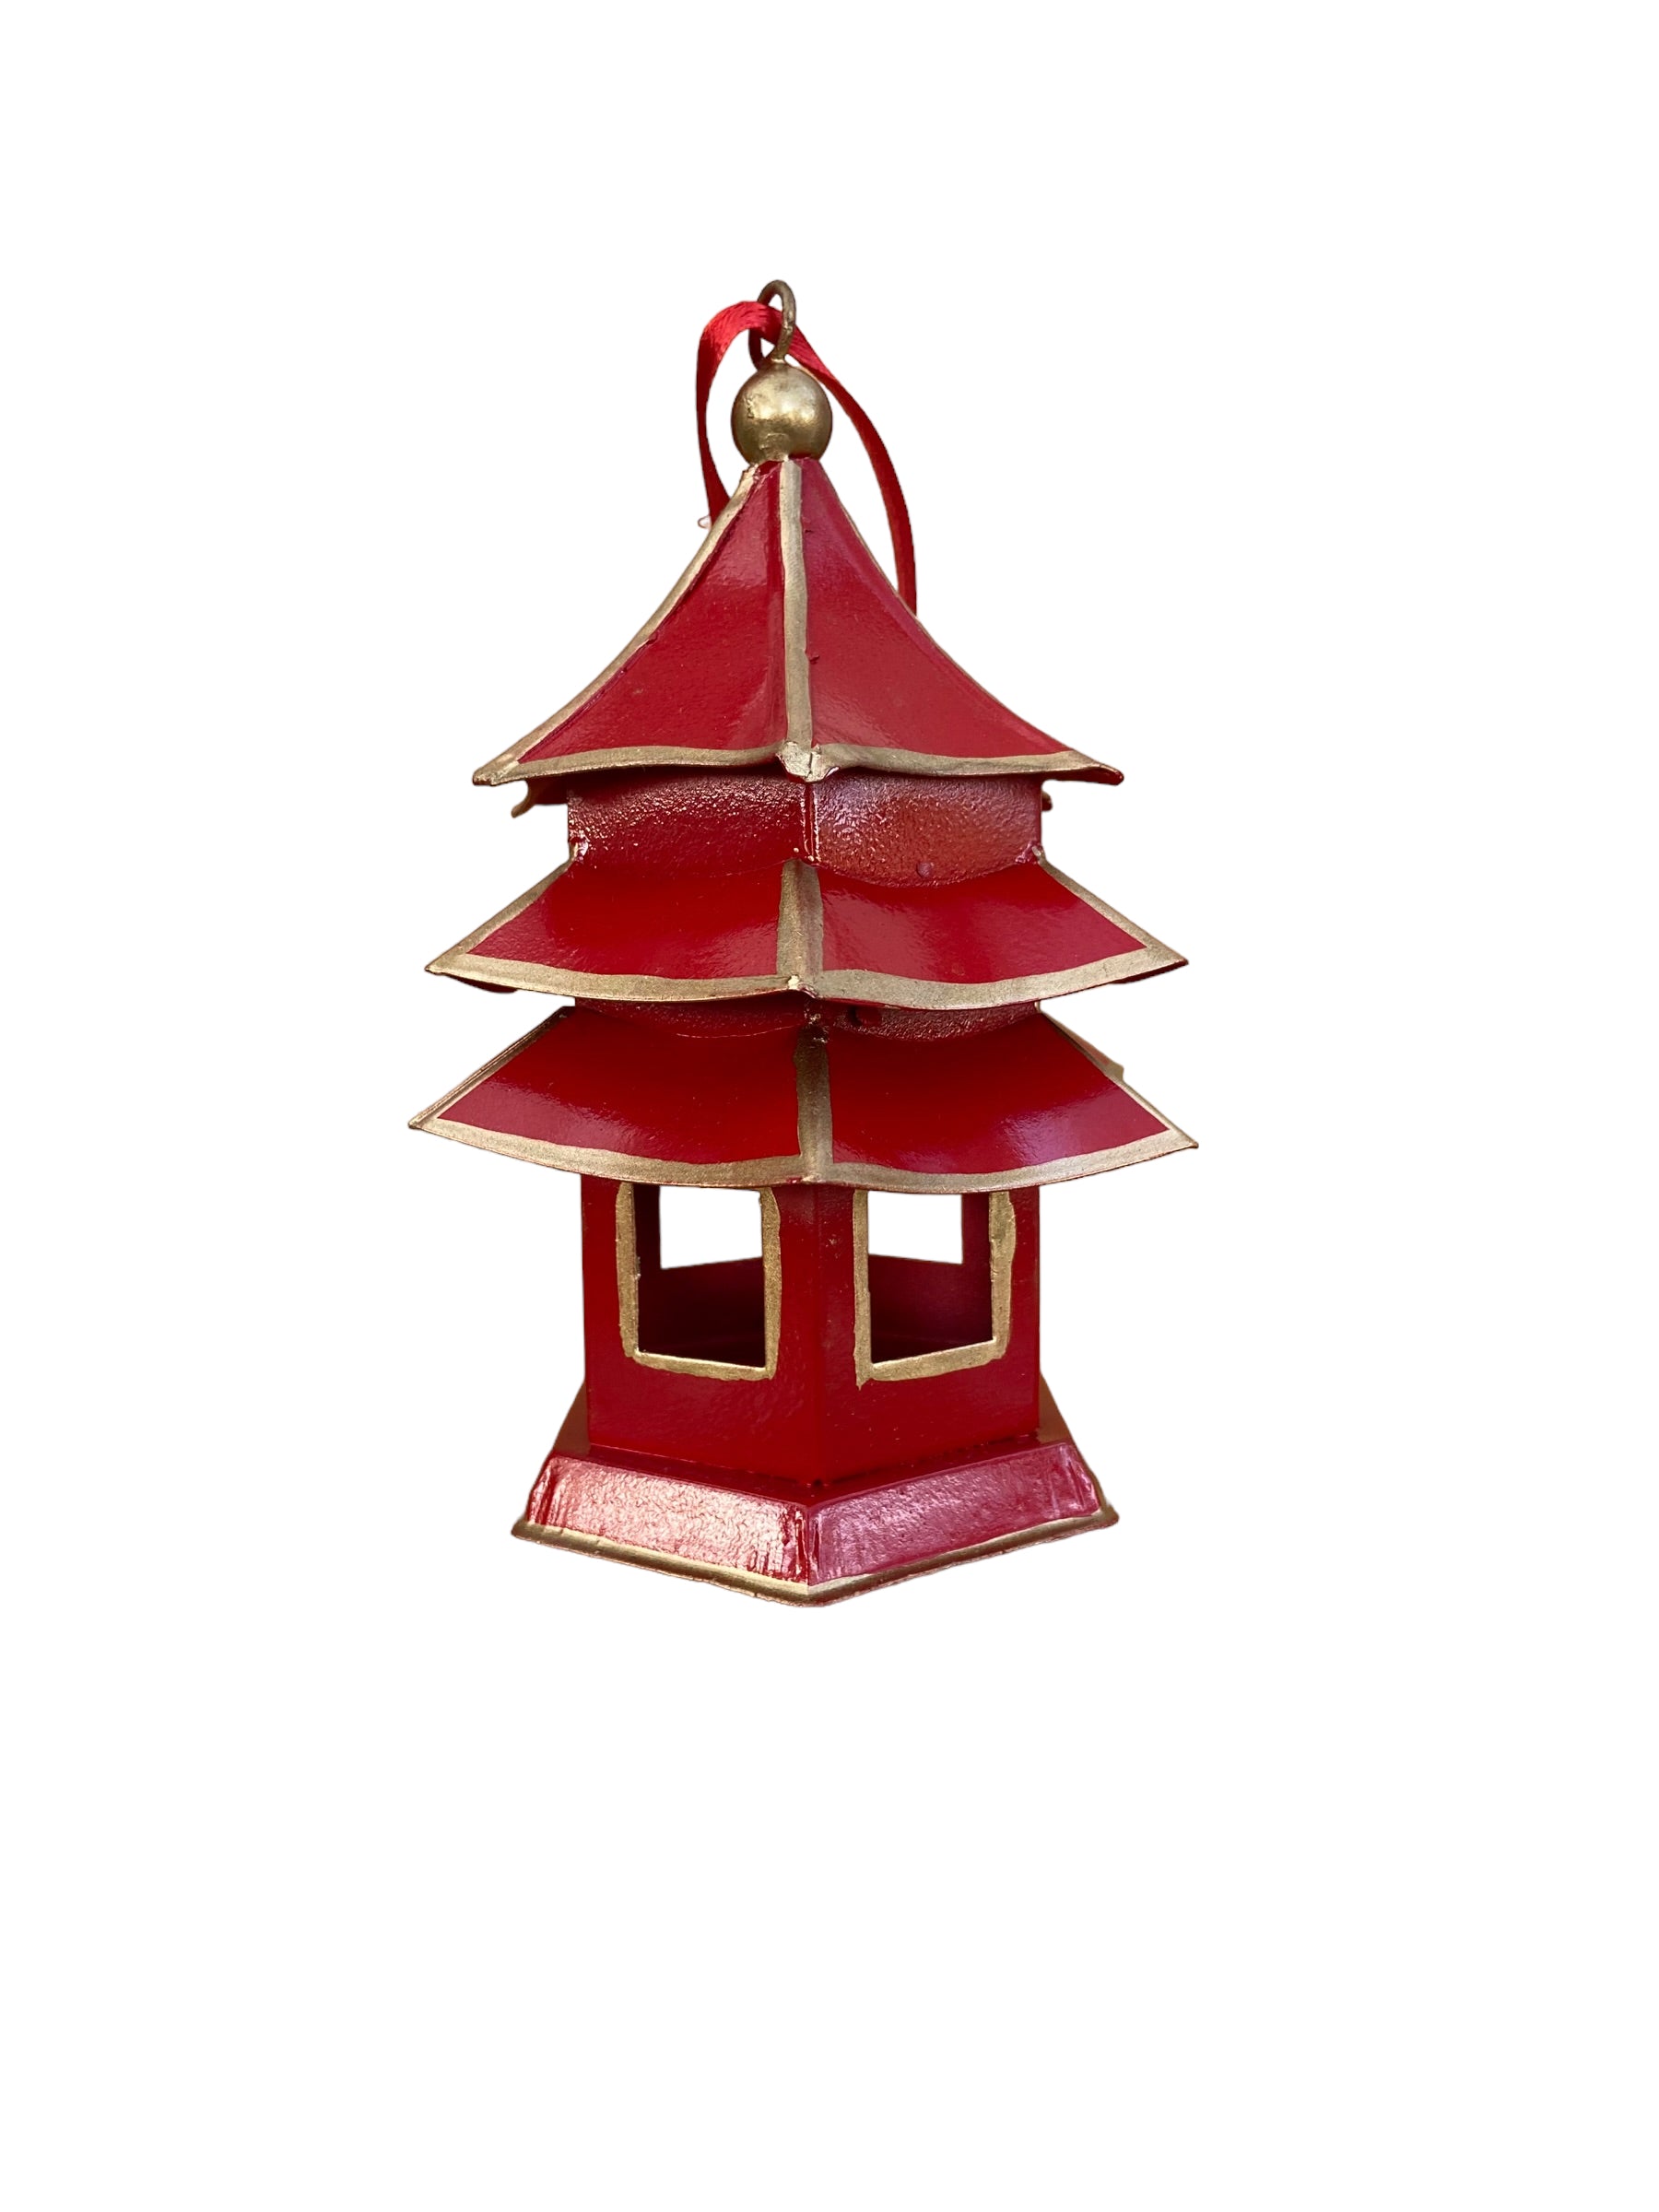 Pagoda Ornament - Hand Painted